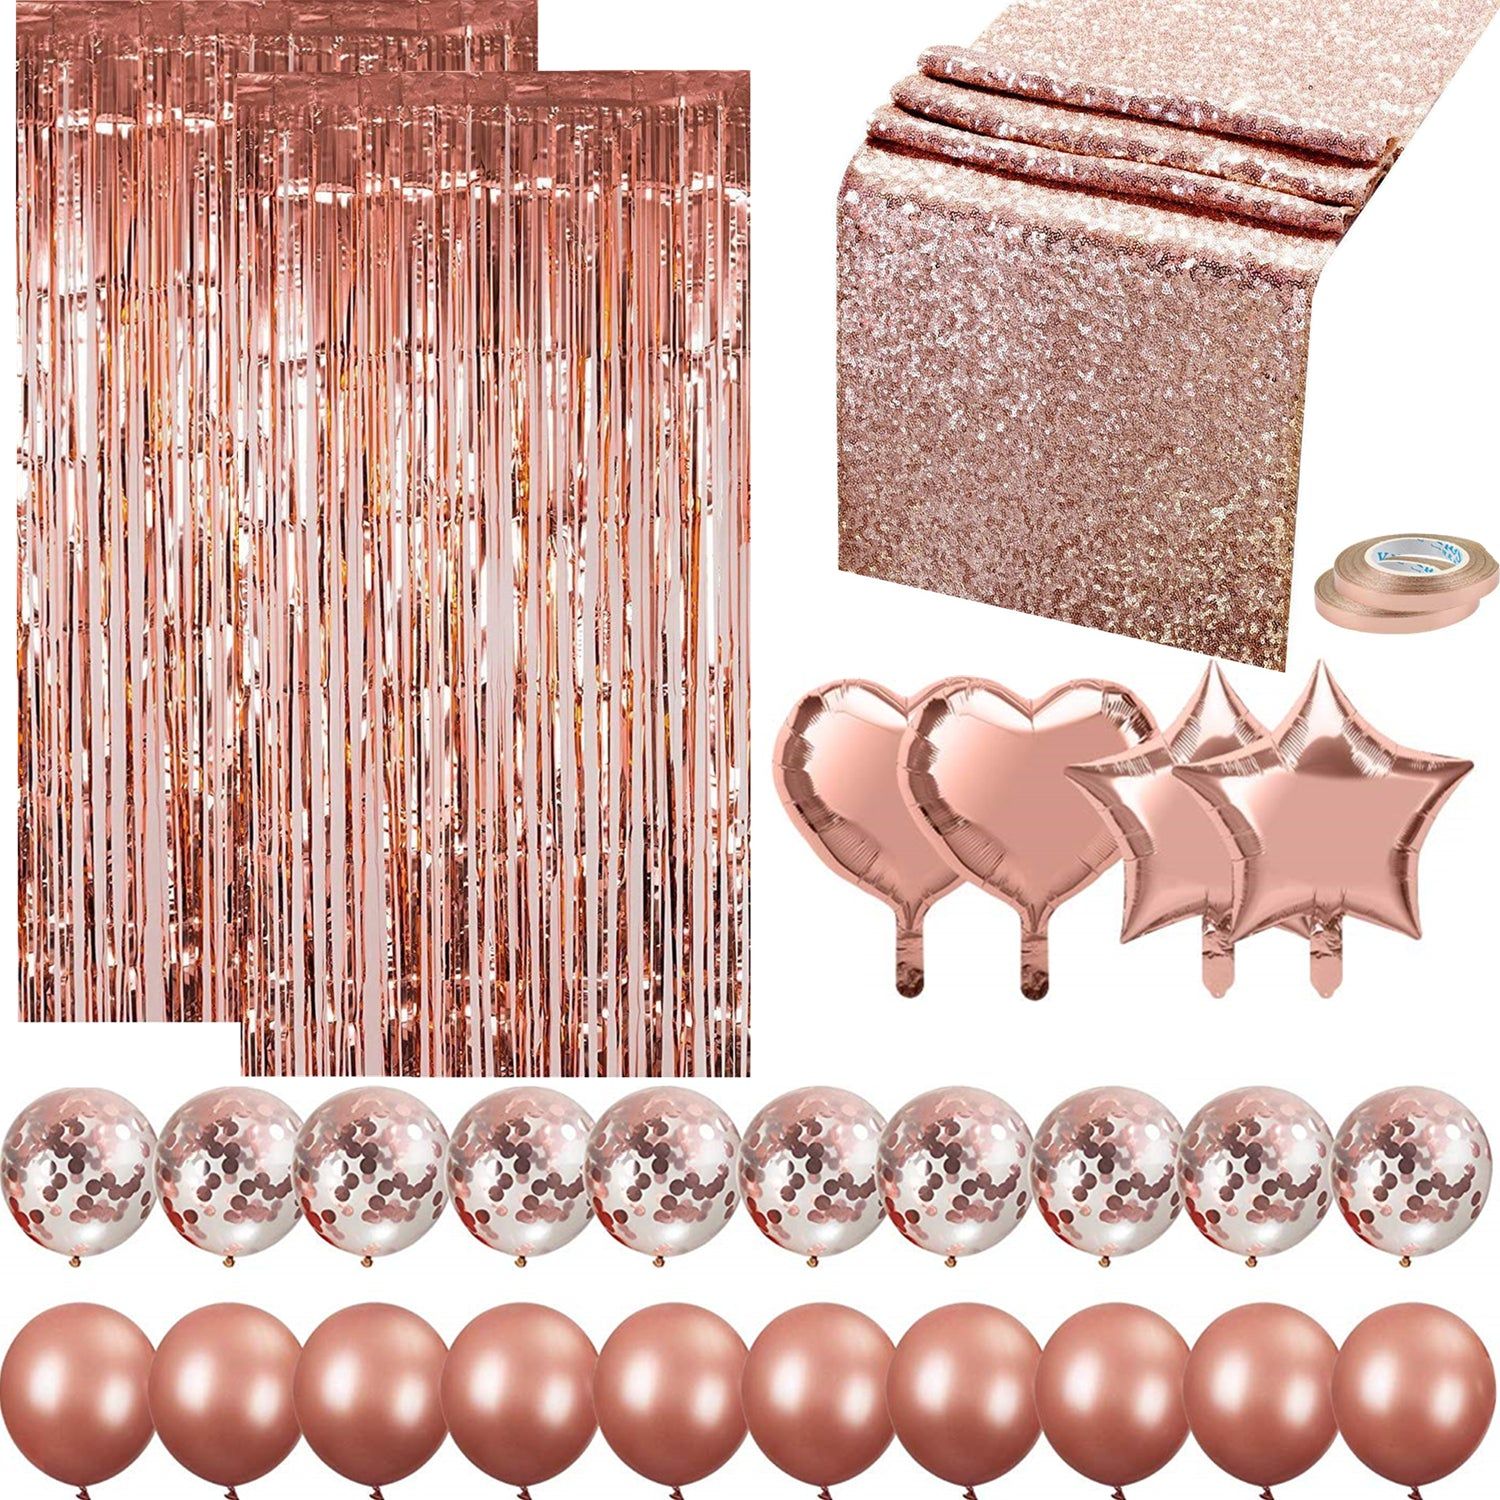 29Pcs Balloons Table Runner Foil Curtains Party Decoration Pack- Rose Gold